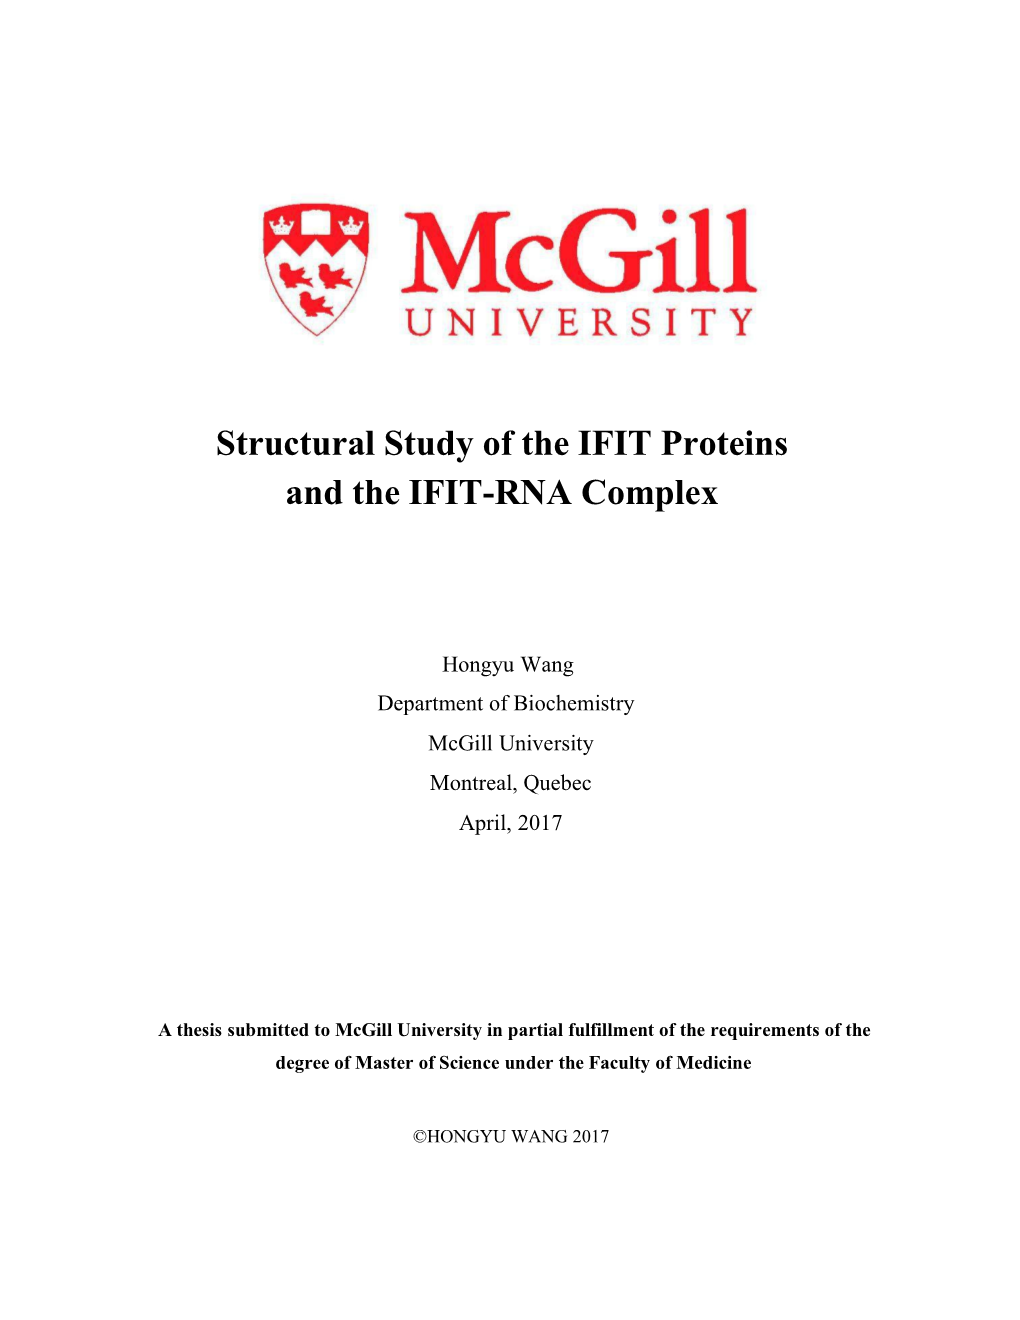 Structural Study of the IFIT Proteins and the IFIT-RNA Complex